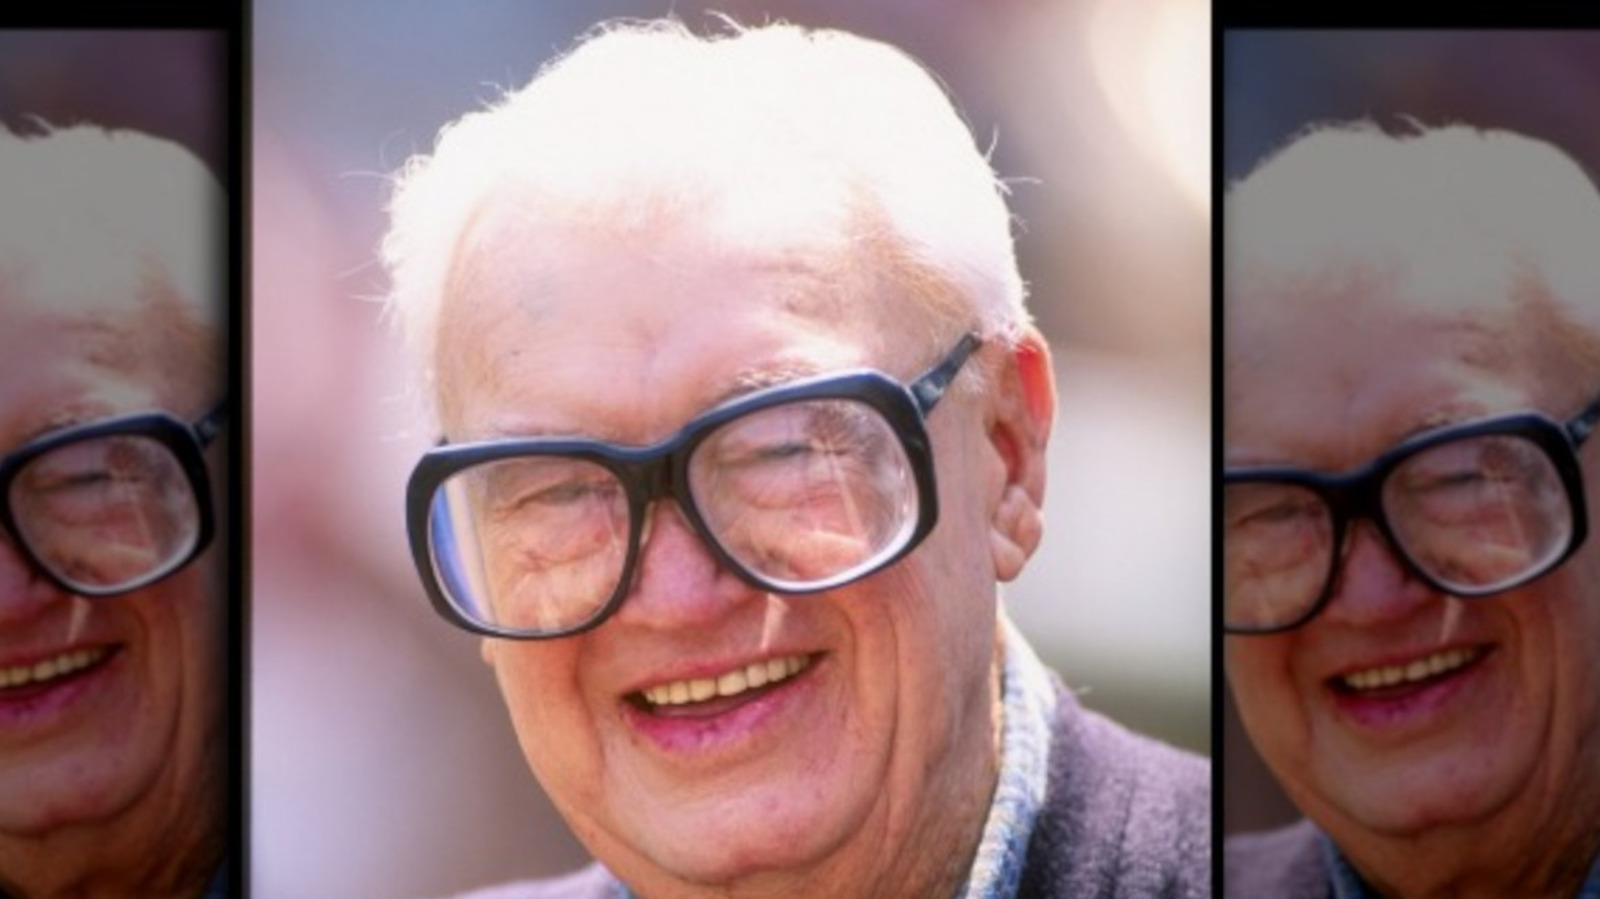 Cubs win!' The gleeful scene from Harry Caray's restaurant